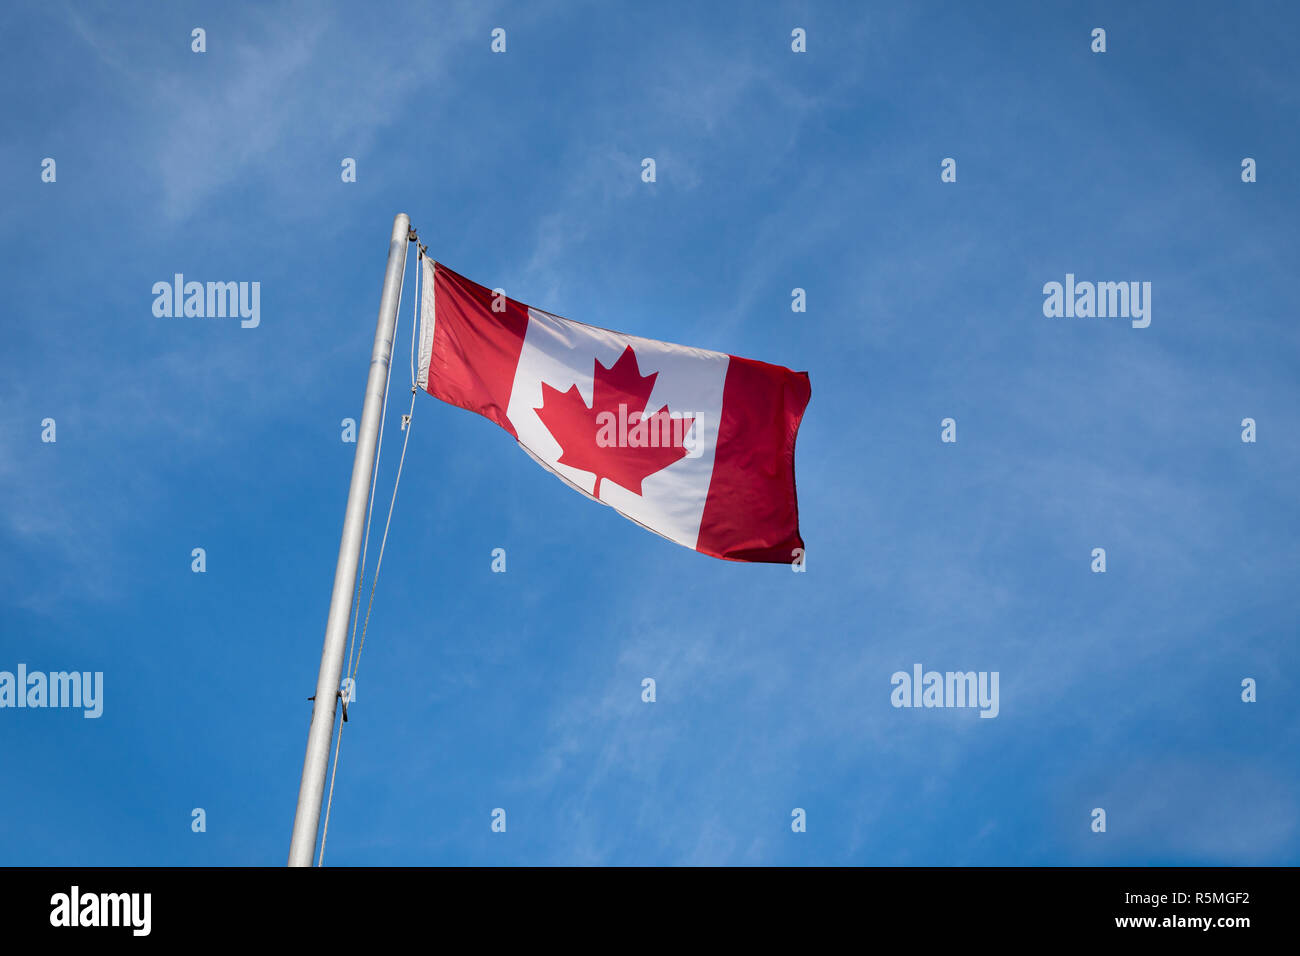 Waving Canadian flag against the blue sky. Stock Photo